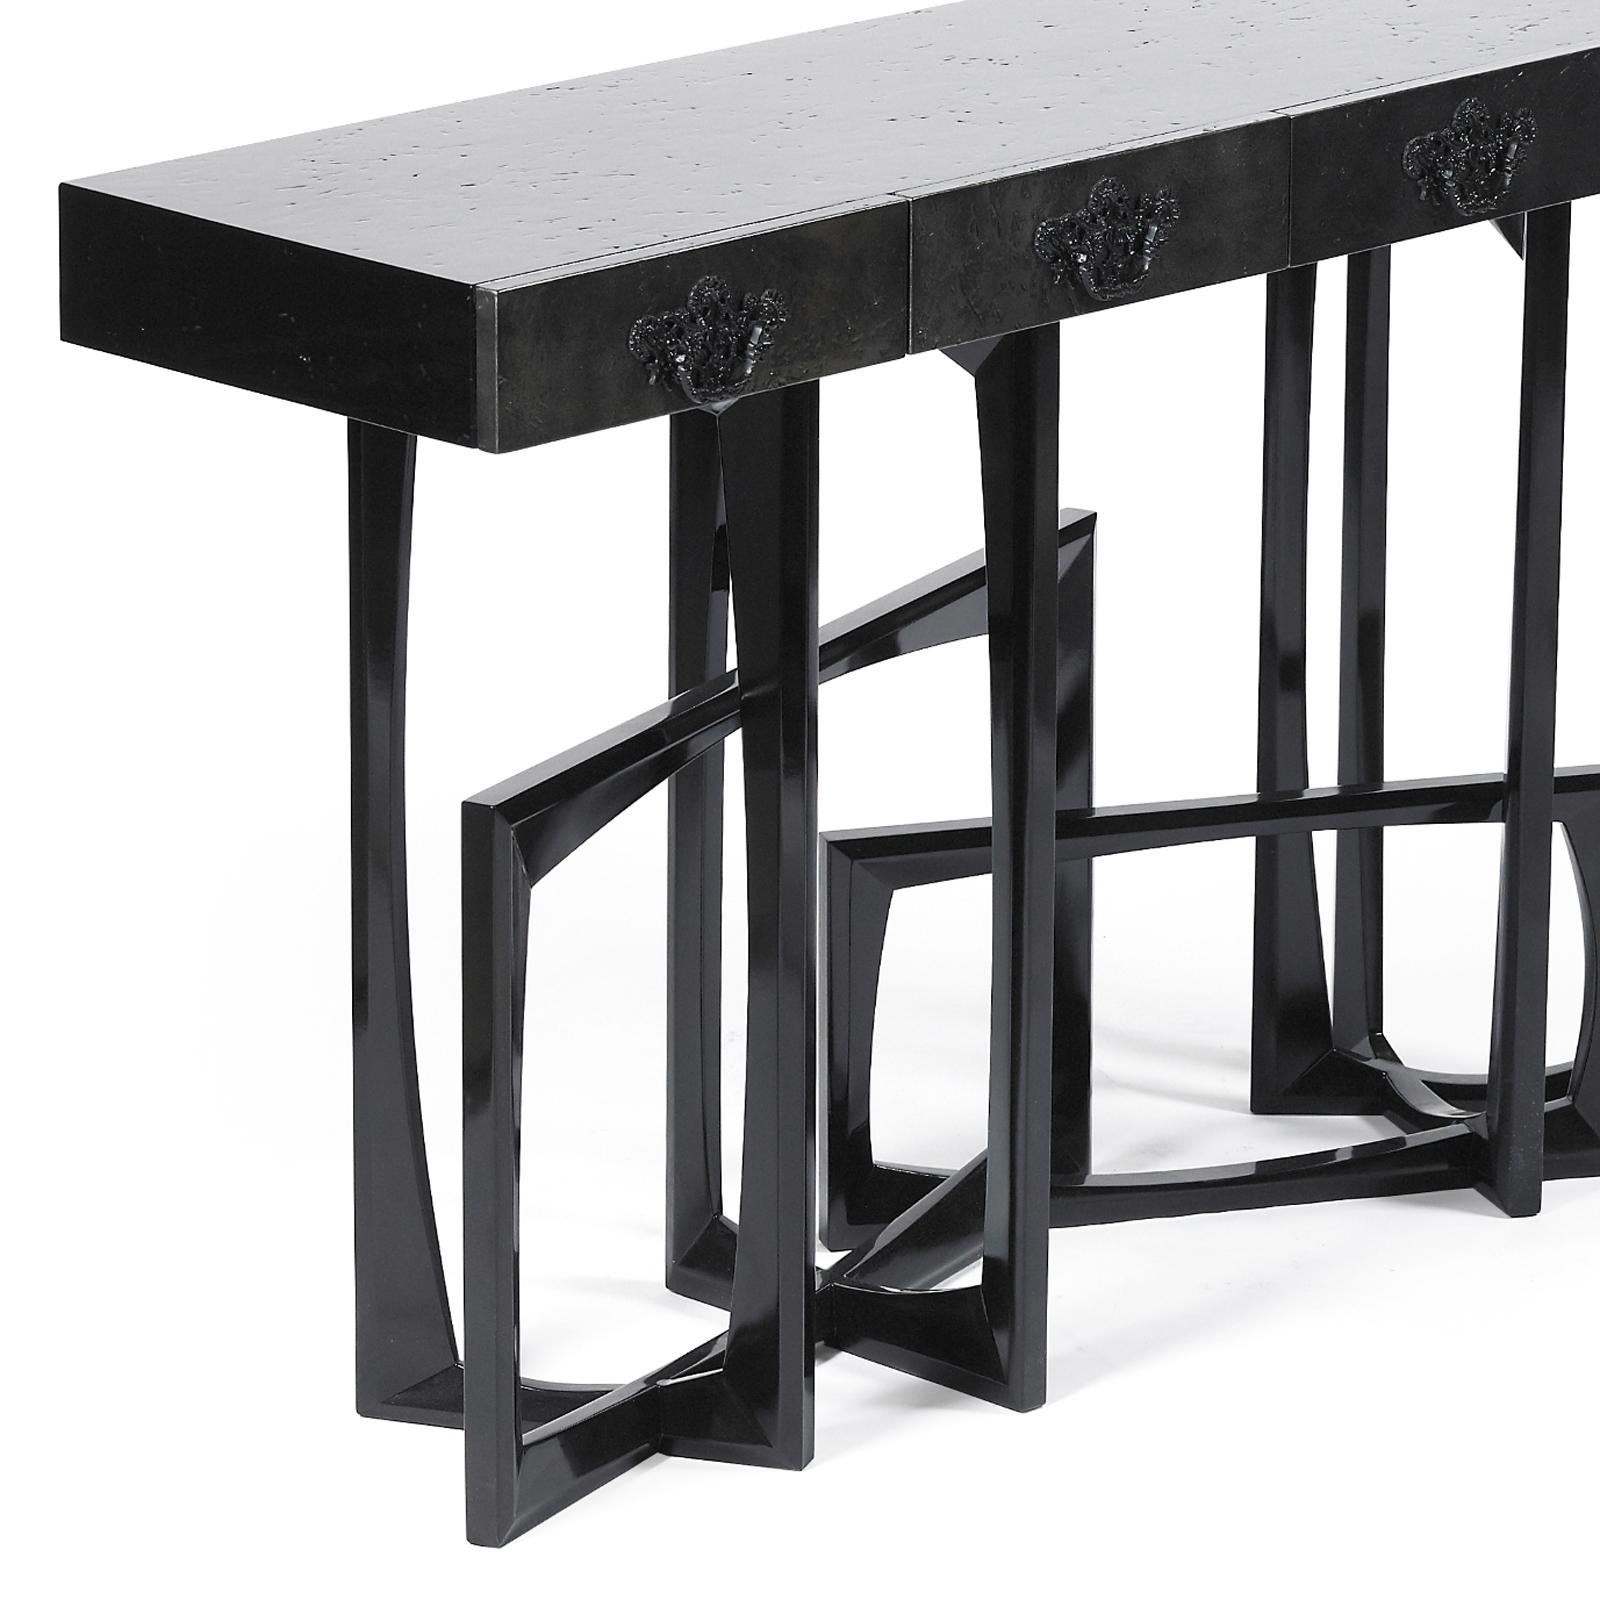 Console table black frame with solid mahogany structure
hand painted with black lacquered paint. Base in black
lacquered paint. Exceptional piece.
Available in gold leaf finish.